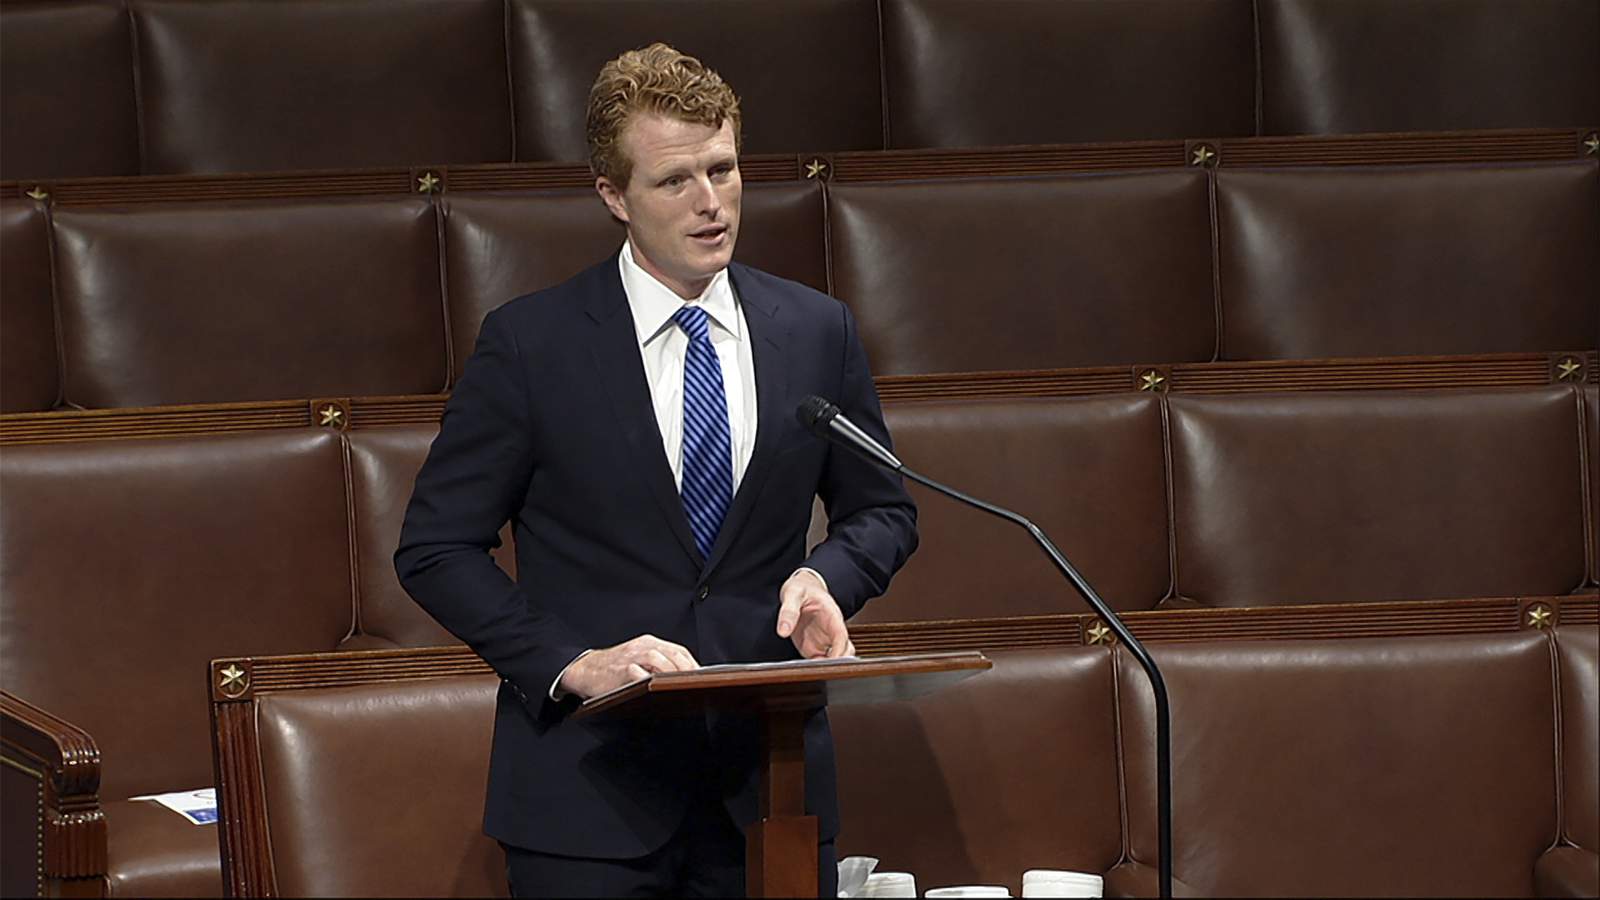 Retiring Rep. Kennedy says greed hinders aid to needy